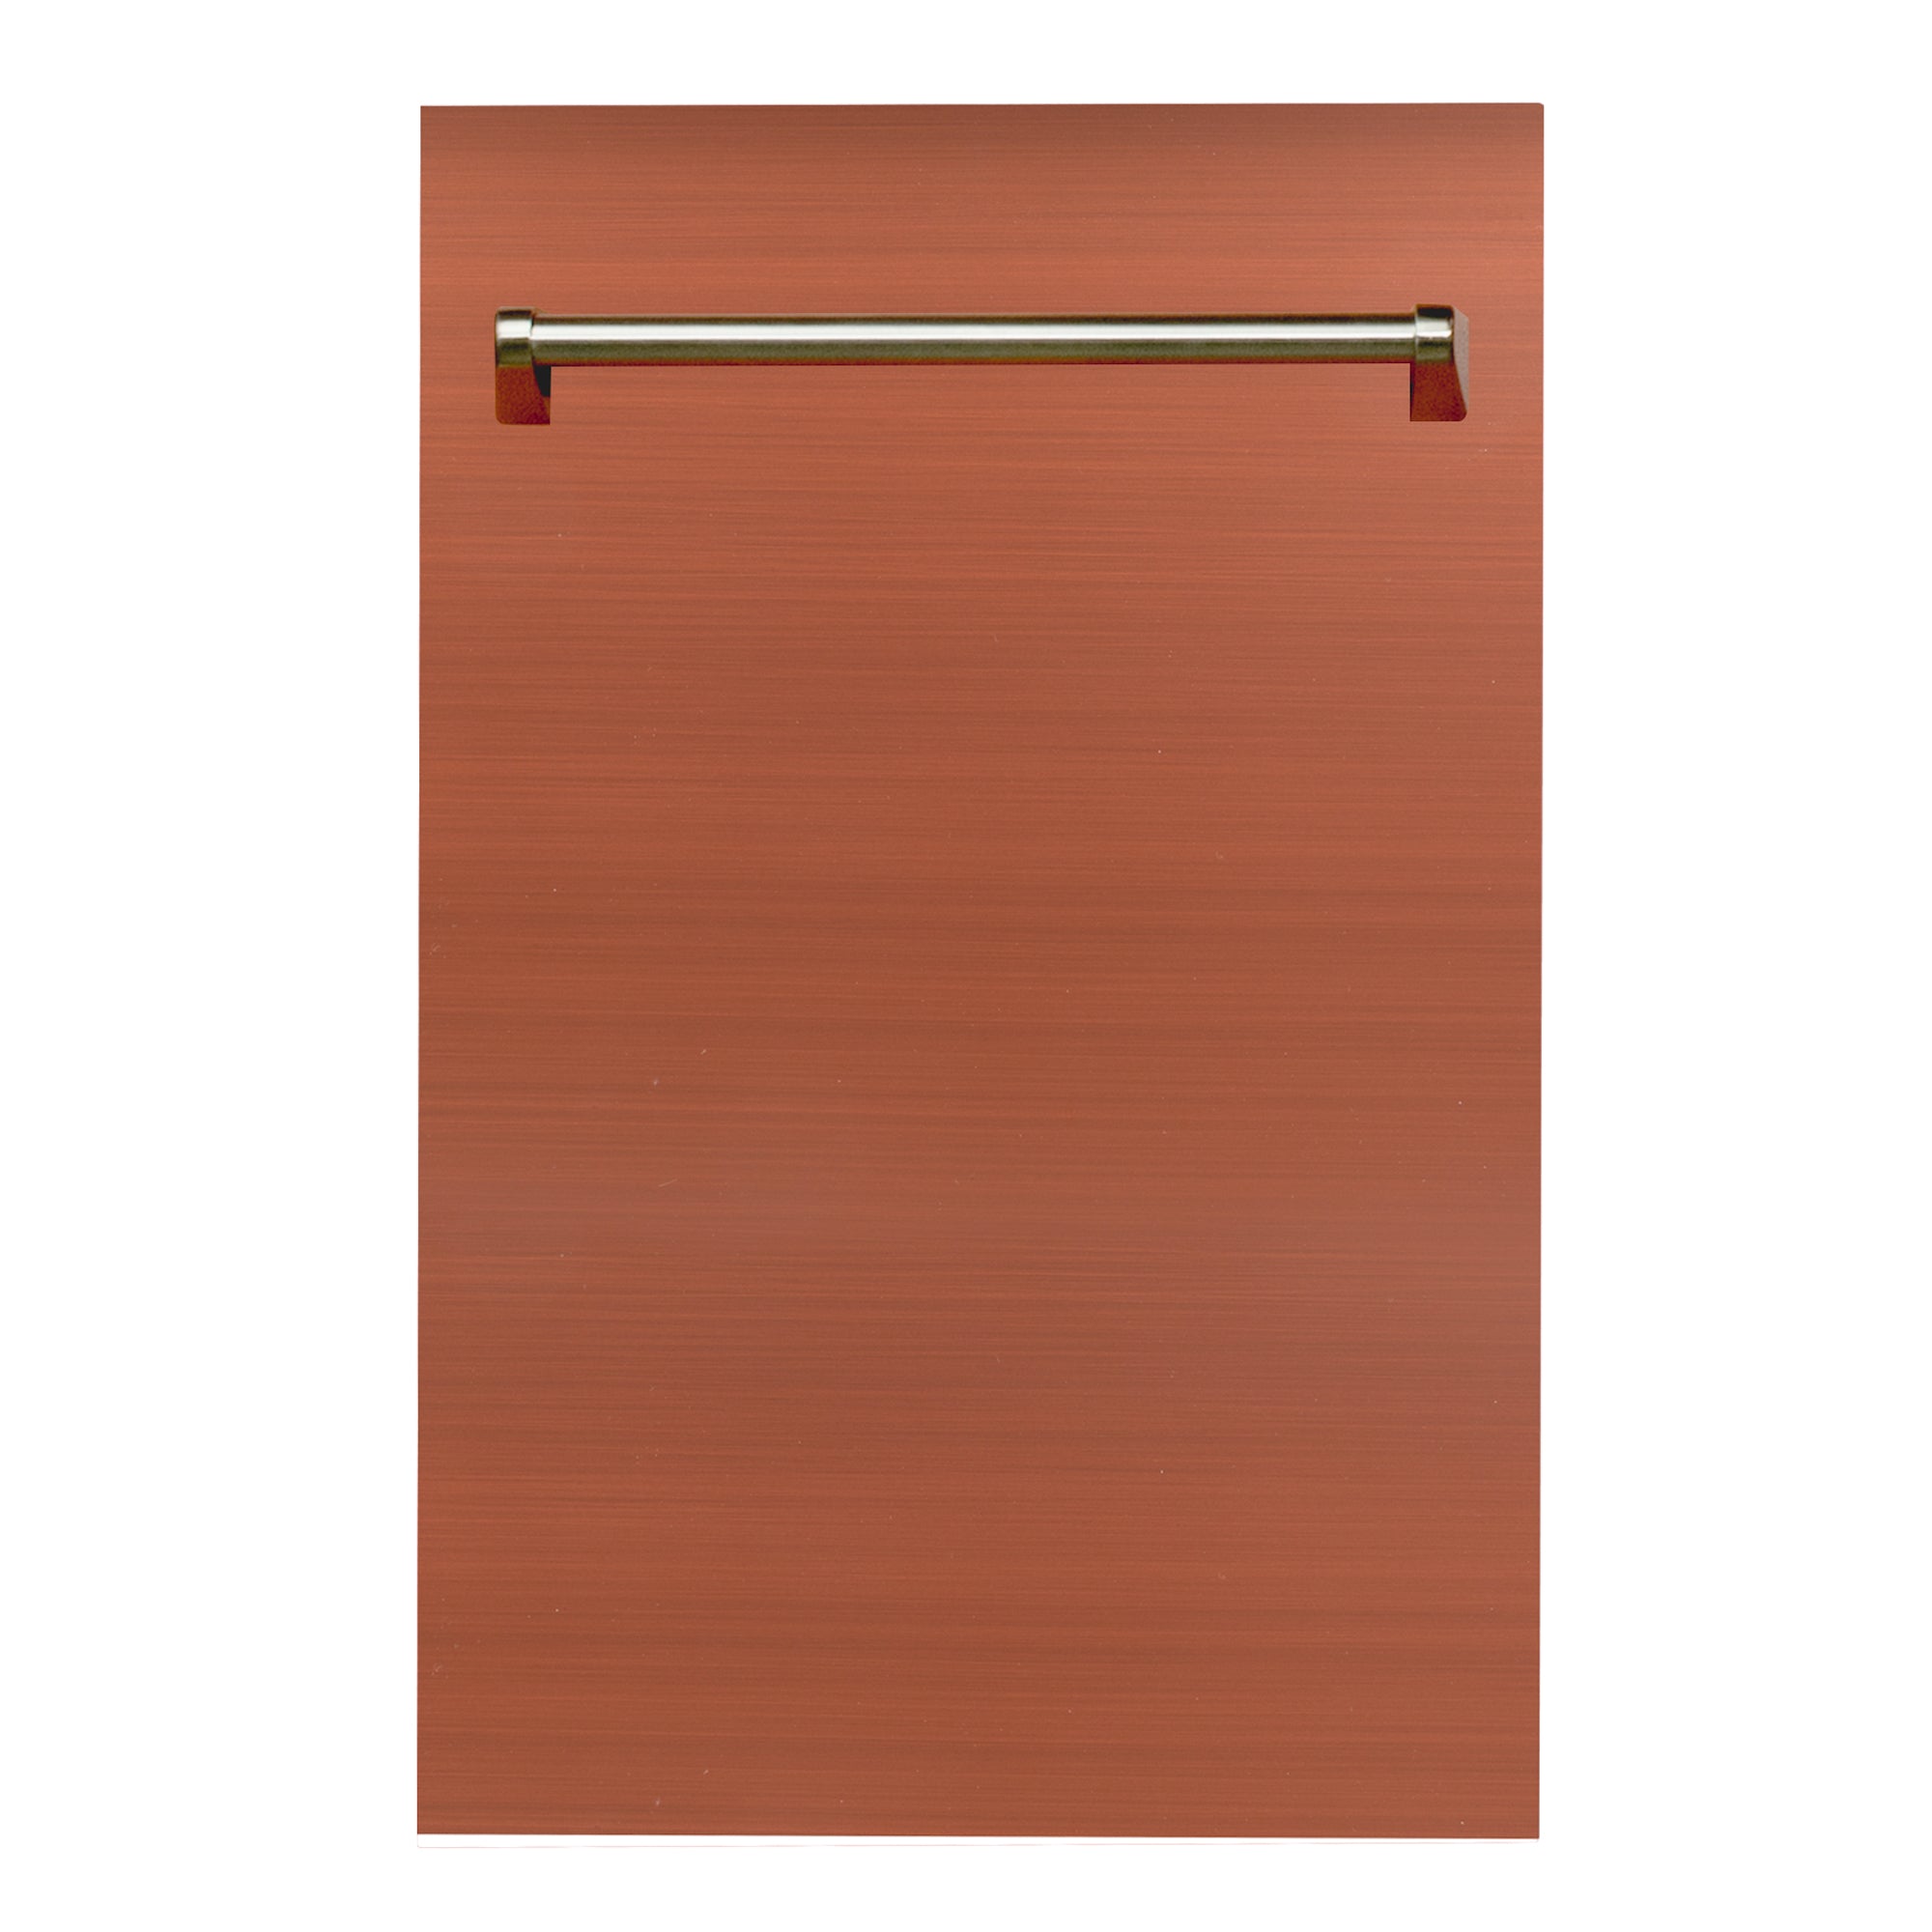 ZLINE 18" Dishwasher Panel in Copper with Traditional Handle (DP-C-H-18)